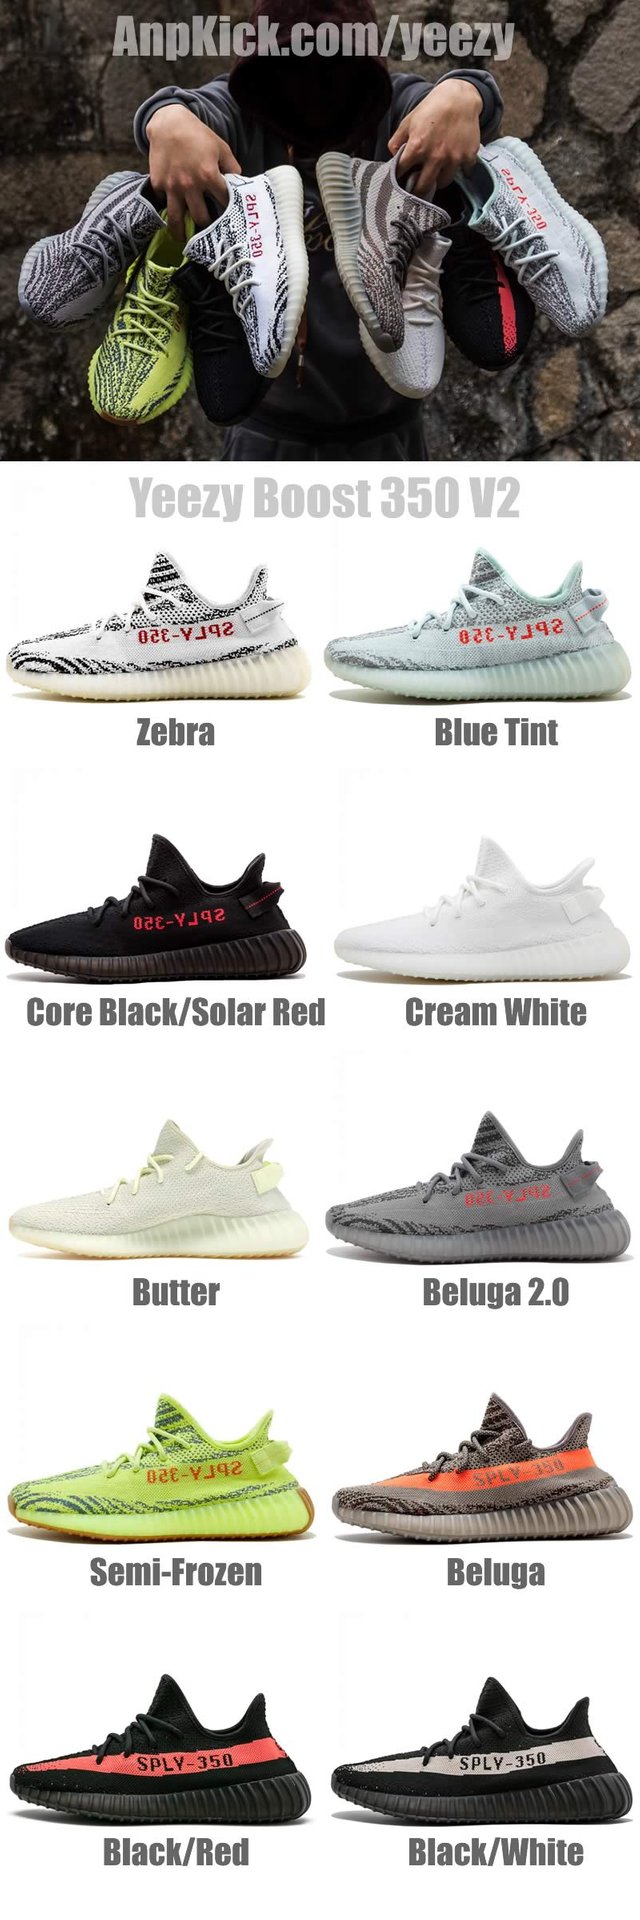 yeezy shoes order online